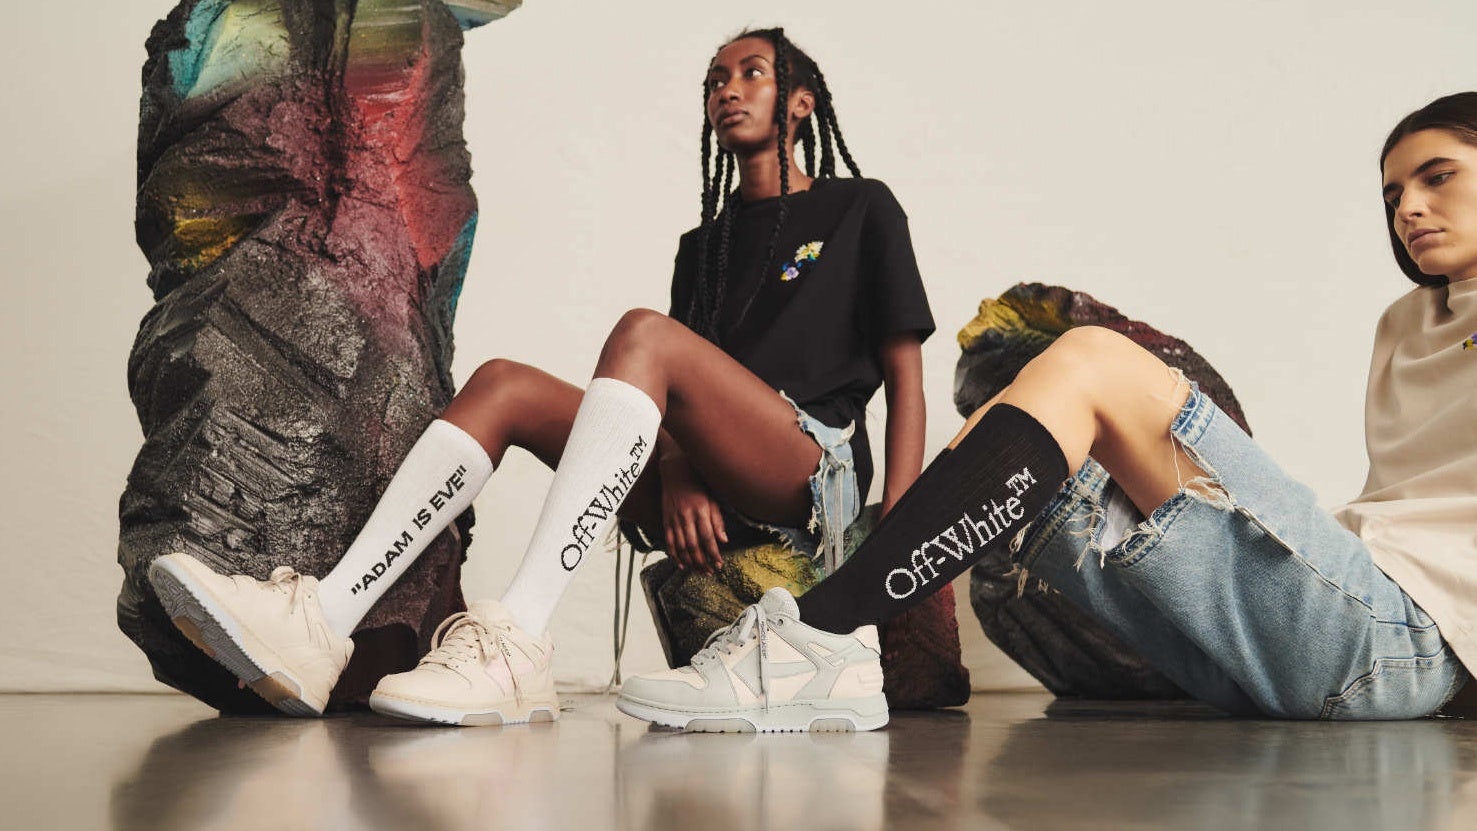 Once called the “hottest brand on the planet,” Off-White has fallen in popularity over recent years. Can a push into China rekindle its coolness? Photo: Off-White's Weibo